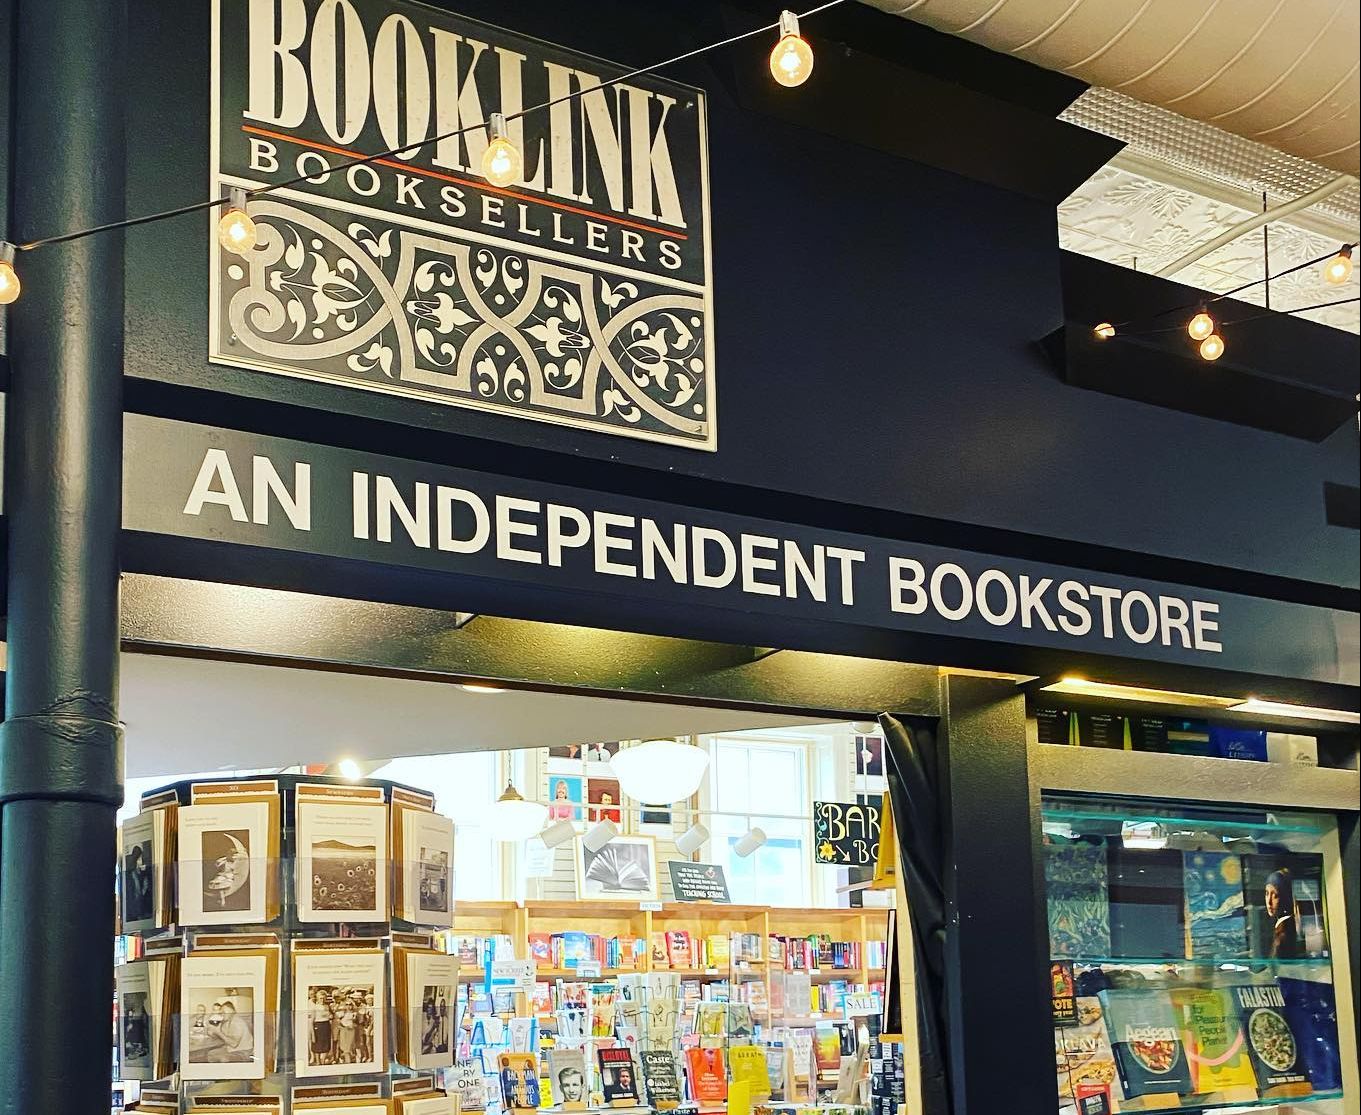 Find your next favorite book at Booklink in Thornes Marketplace Northampton MA!